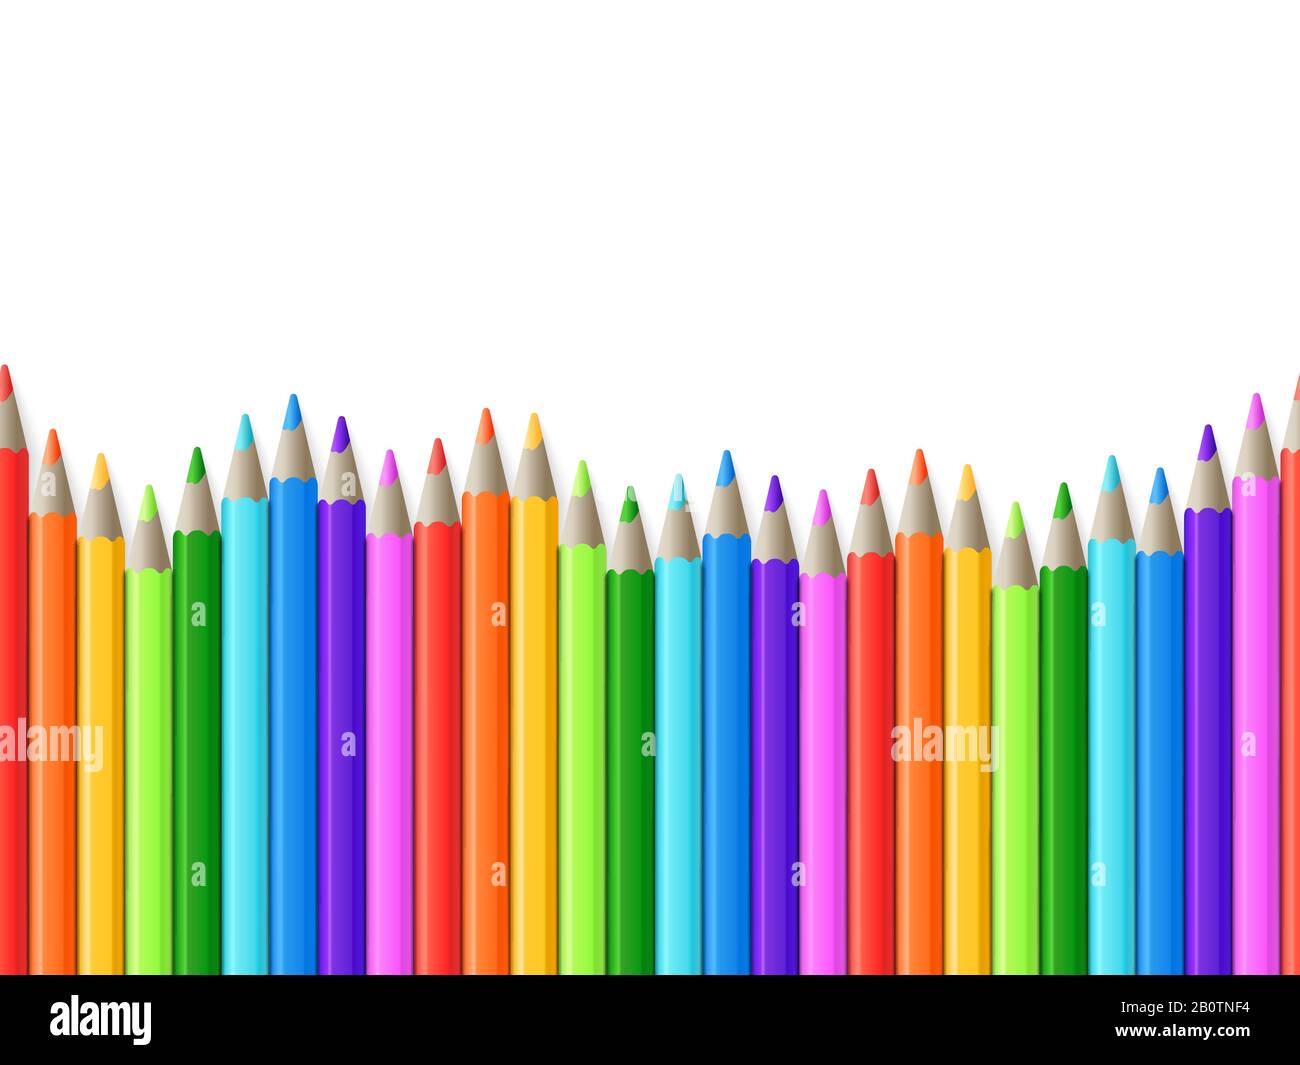 Pencil Colors Vector stock vector. Illustration of draw - 42846973